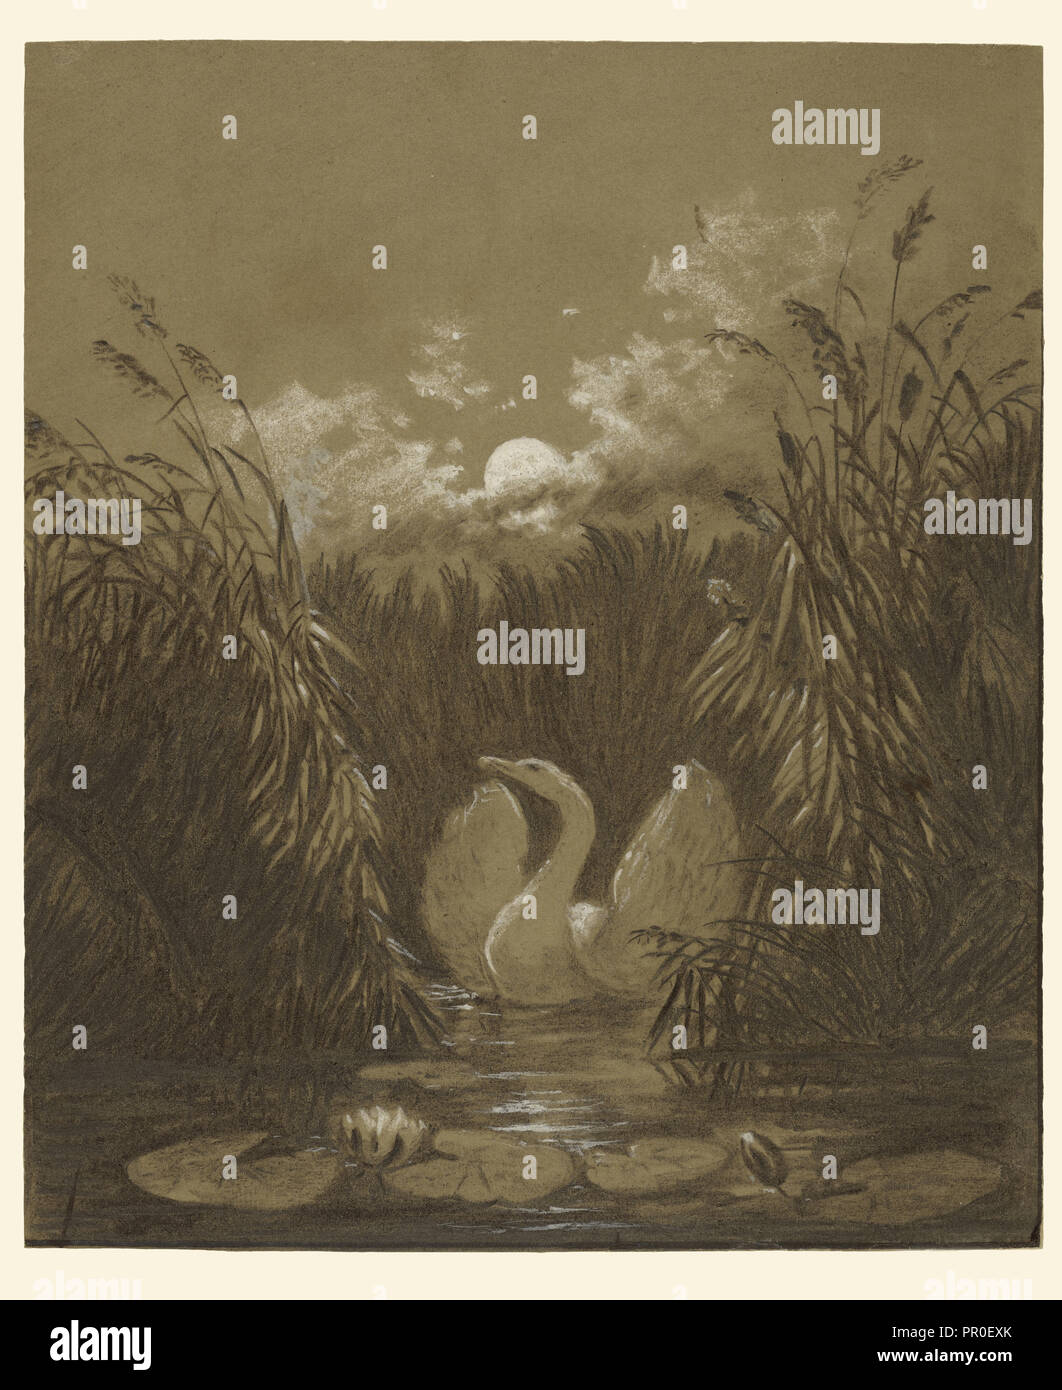 A Swan Among the Reeds, by Moonlight; Carl Gustav Carus, German, 1789 - 1869, Germany; September 18, 1852; Charcoal with white Stock Photo